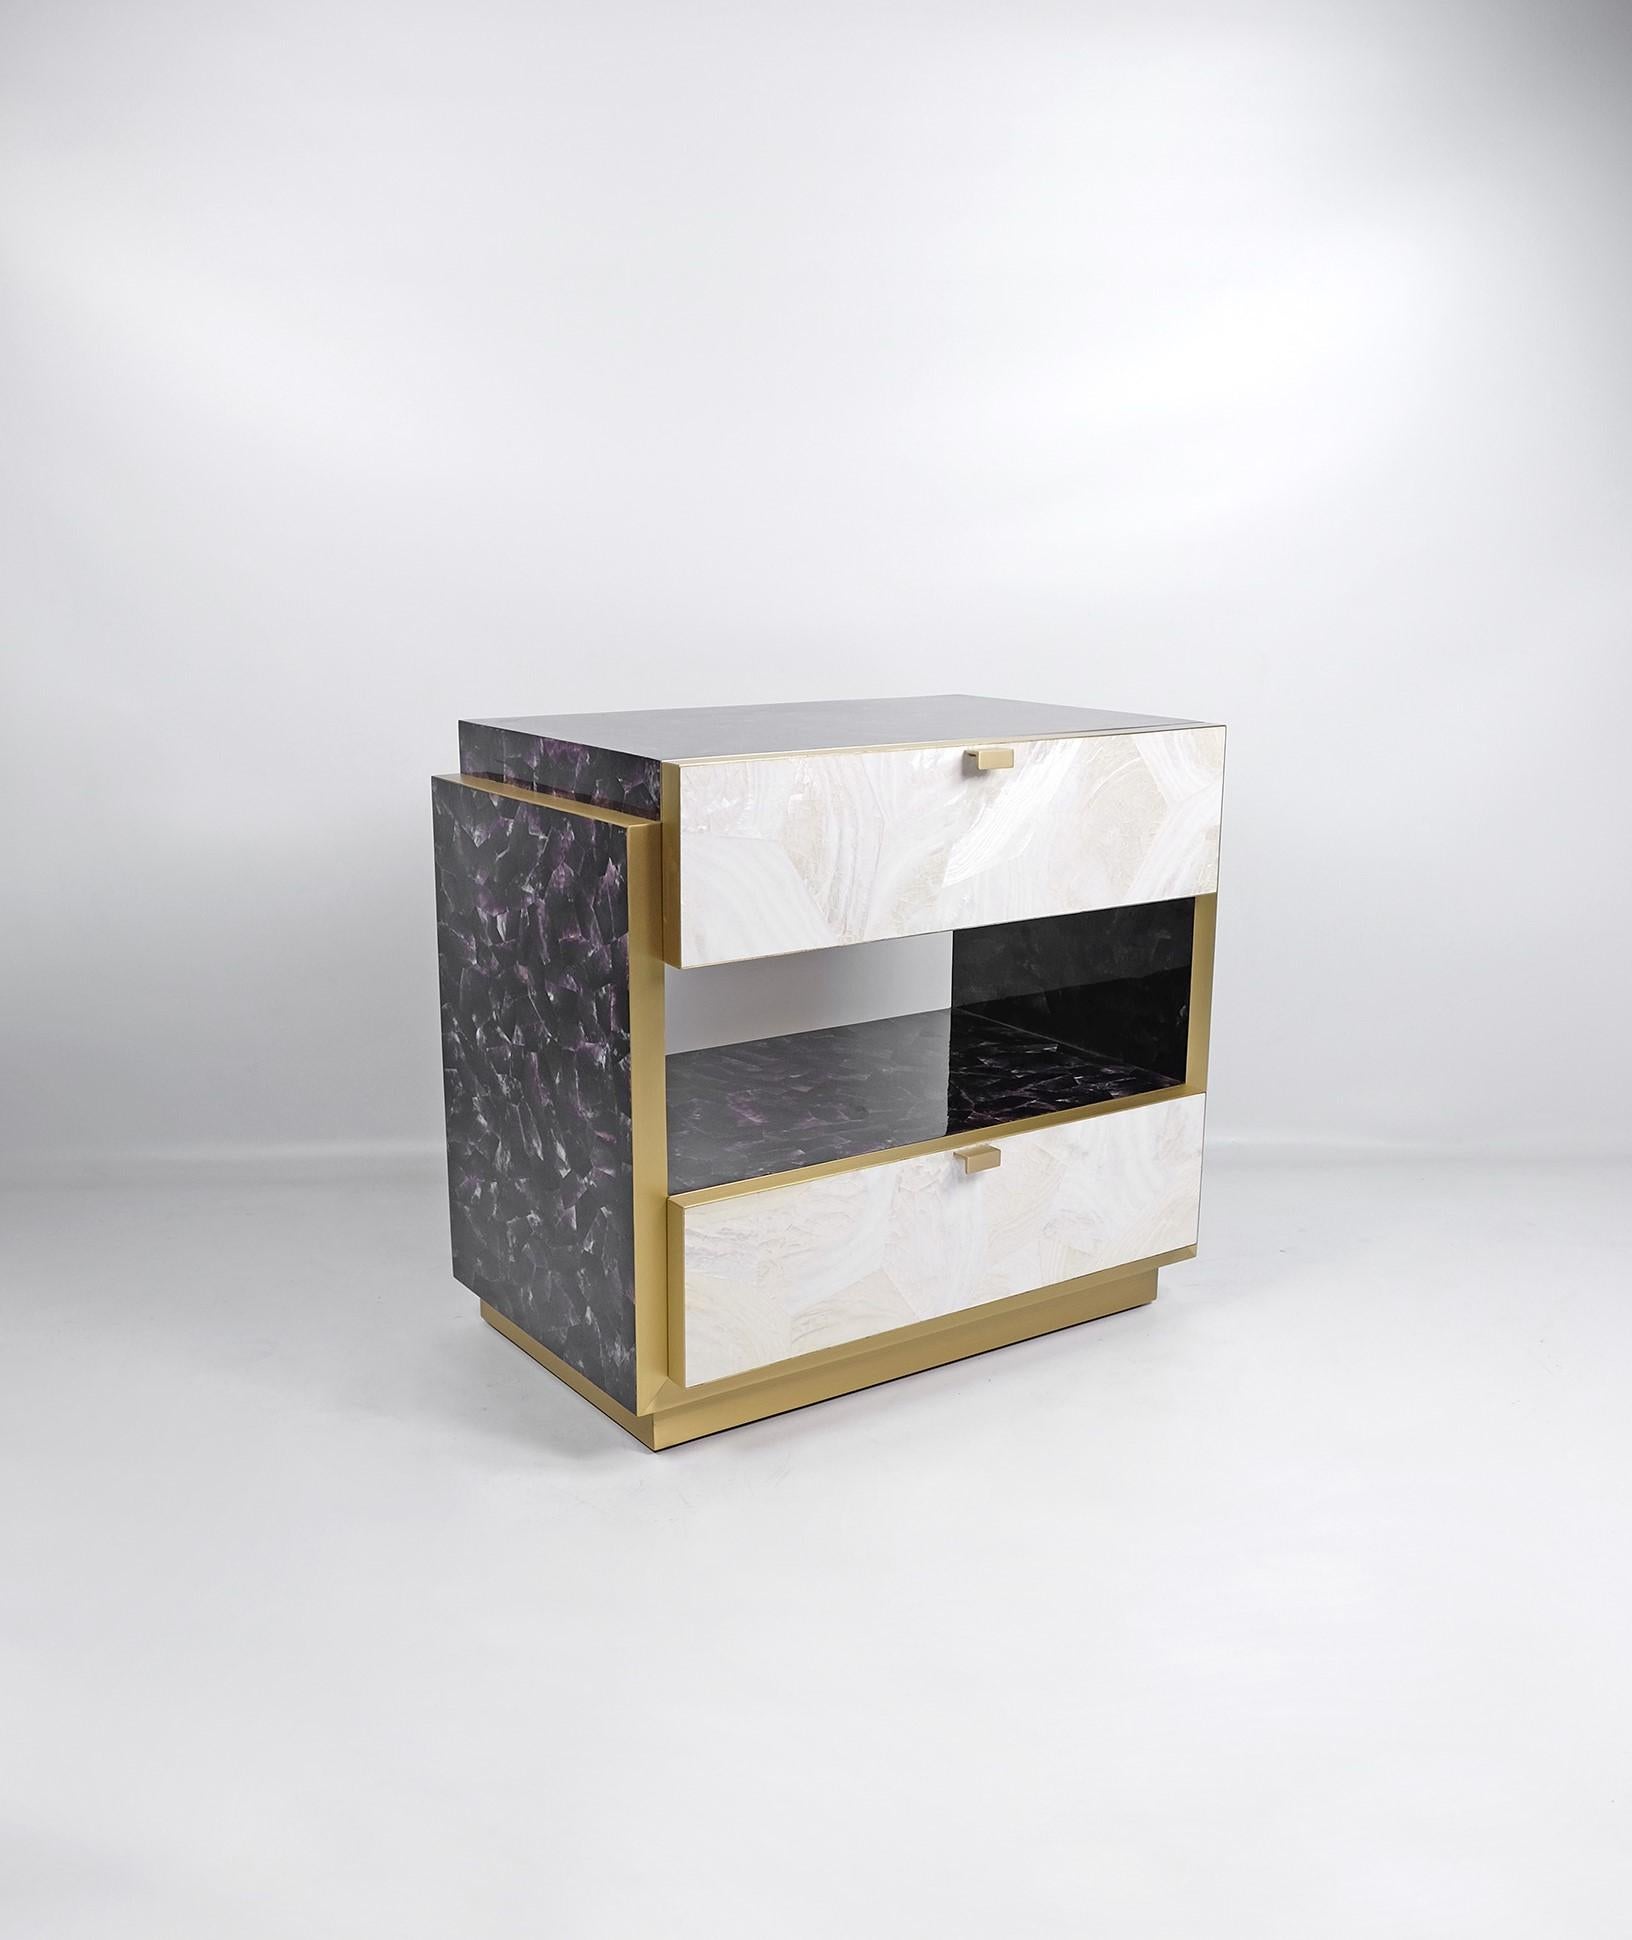 This rectangular bedside table has two drawers and it is made of a purple and white polished shell marquetry.
The edges and the base have brass trims.
The handles are in brass.

The dimensions of this piece are W23.6